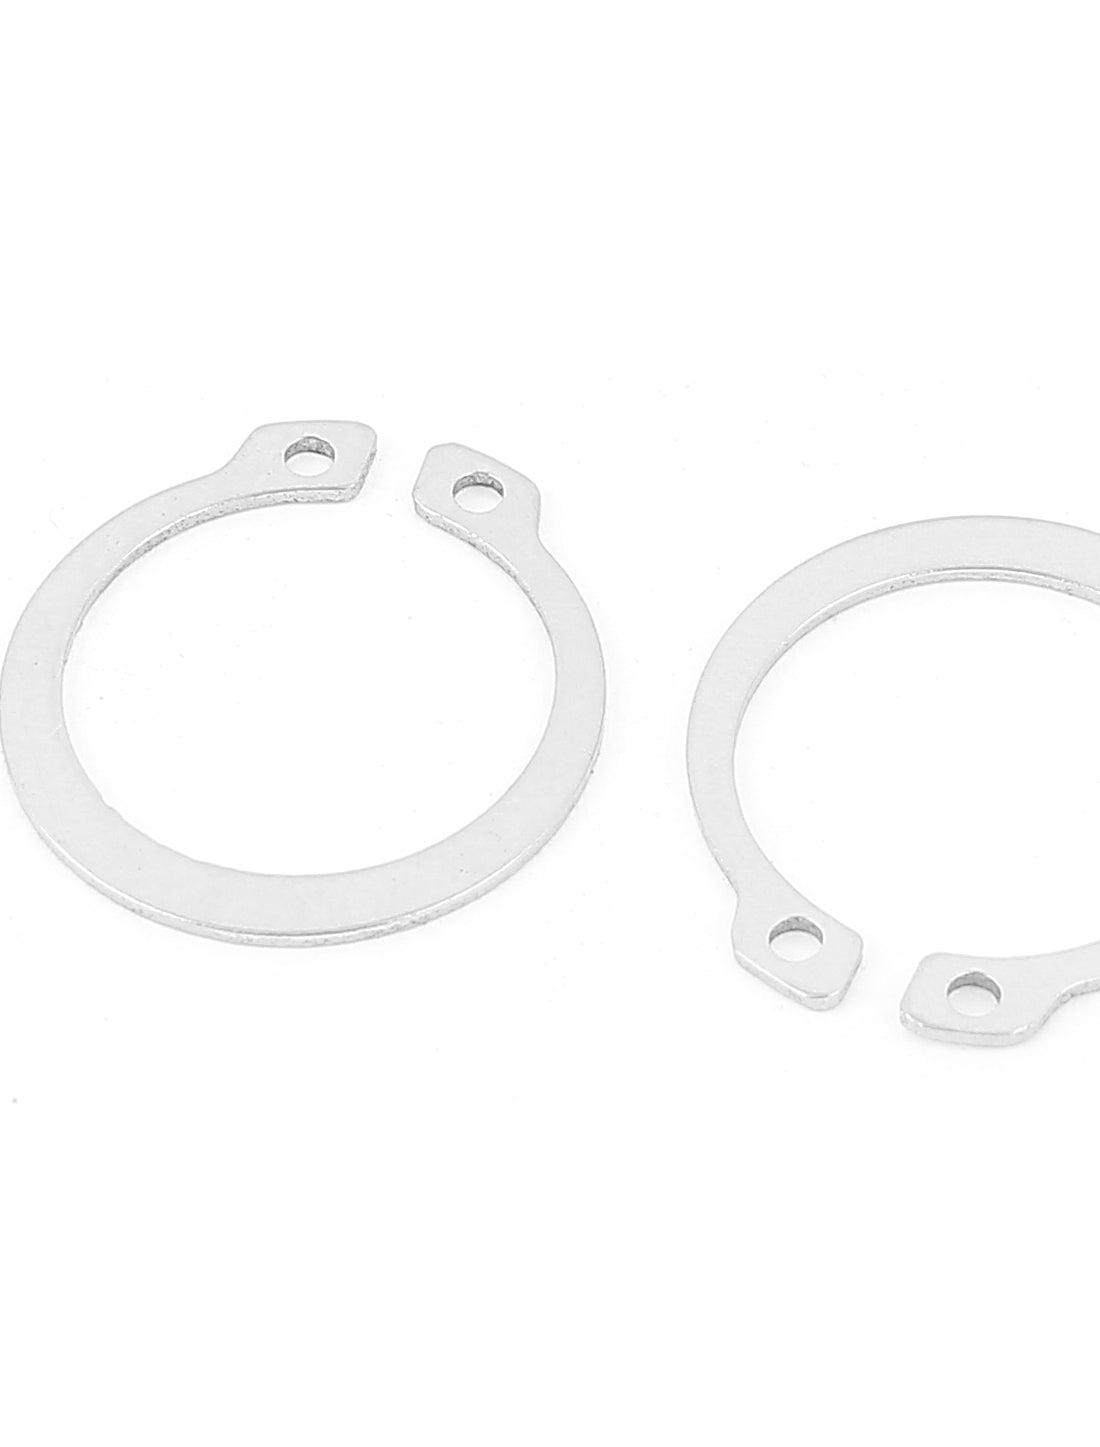 uxcell Uxcell 10pcs 304 Stainless Steel External Circlip Retaining Shaft Snap Rings 25mm